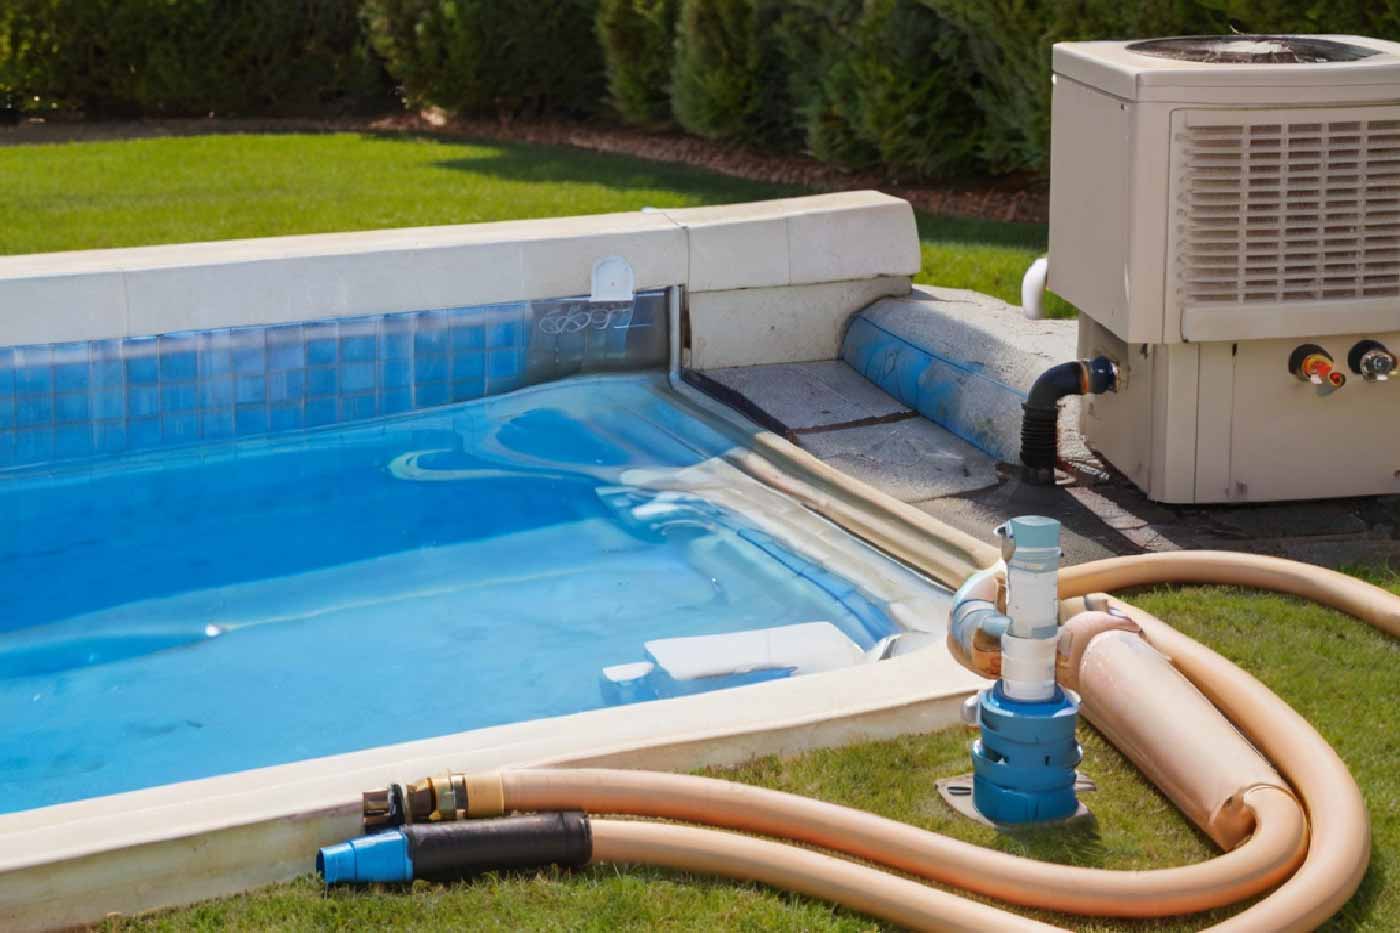 Who Can Run a Gas Line for a Pool Heater